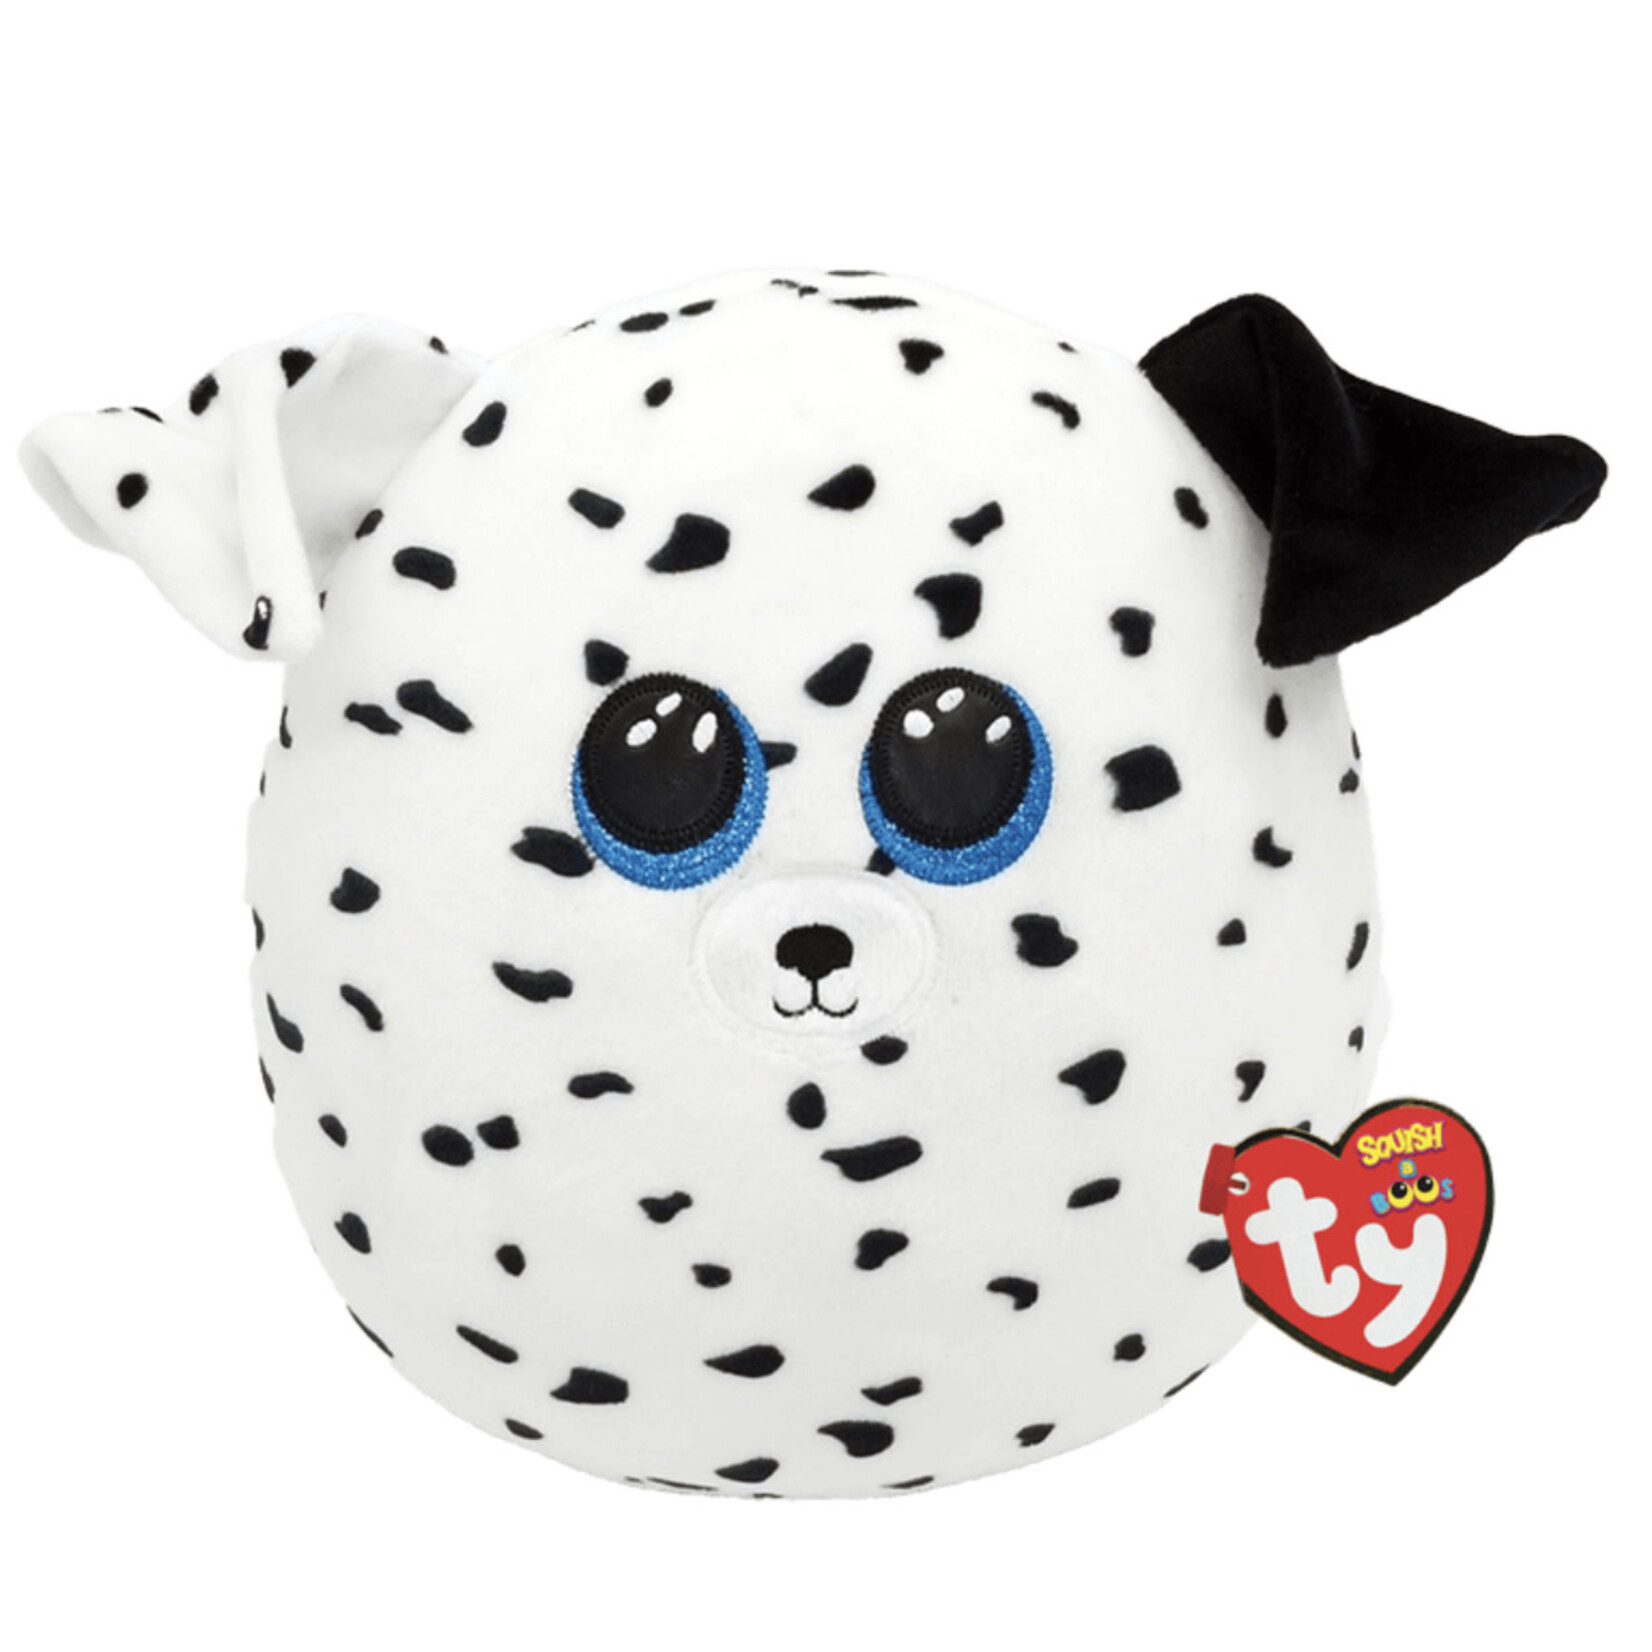 TY Ty Fetch Dalmatian Squish-A-Boo Large